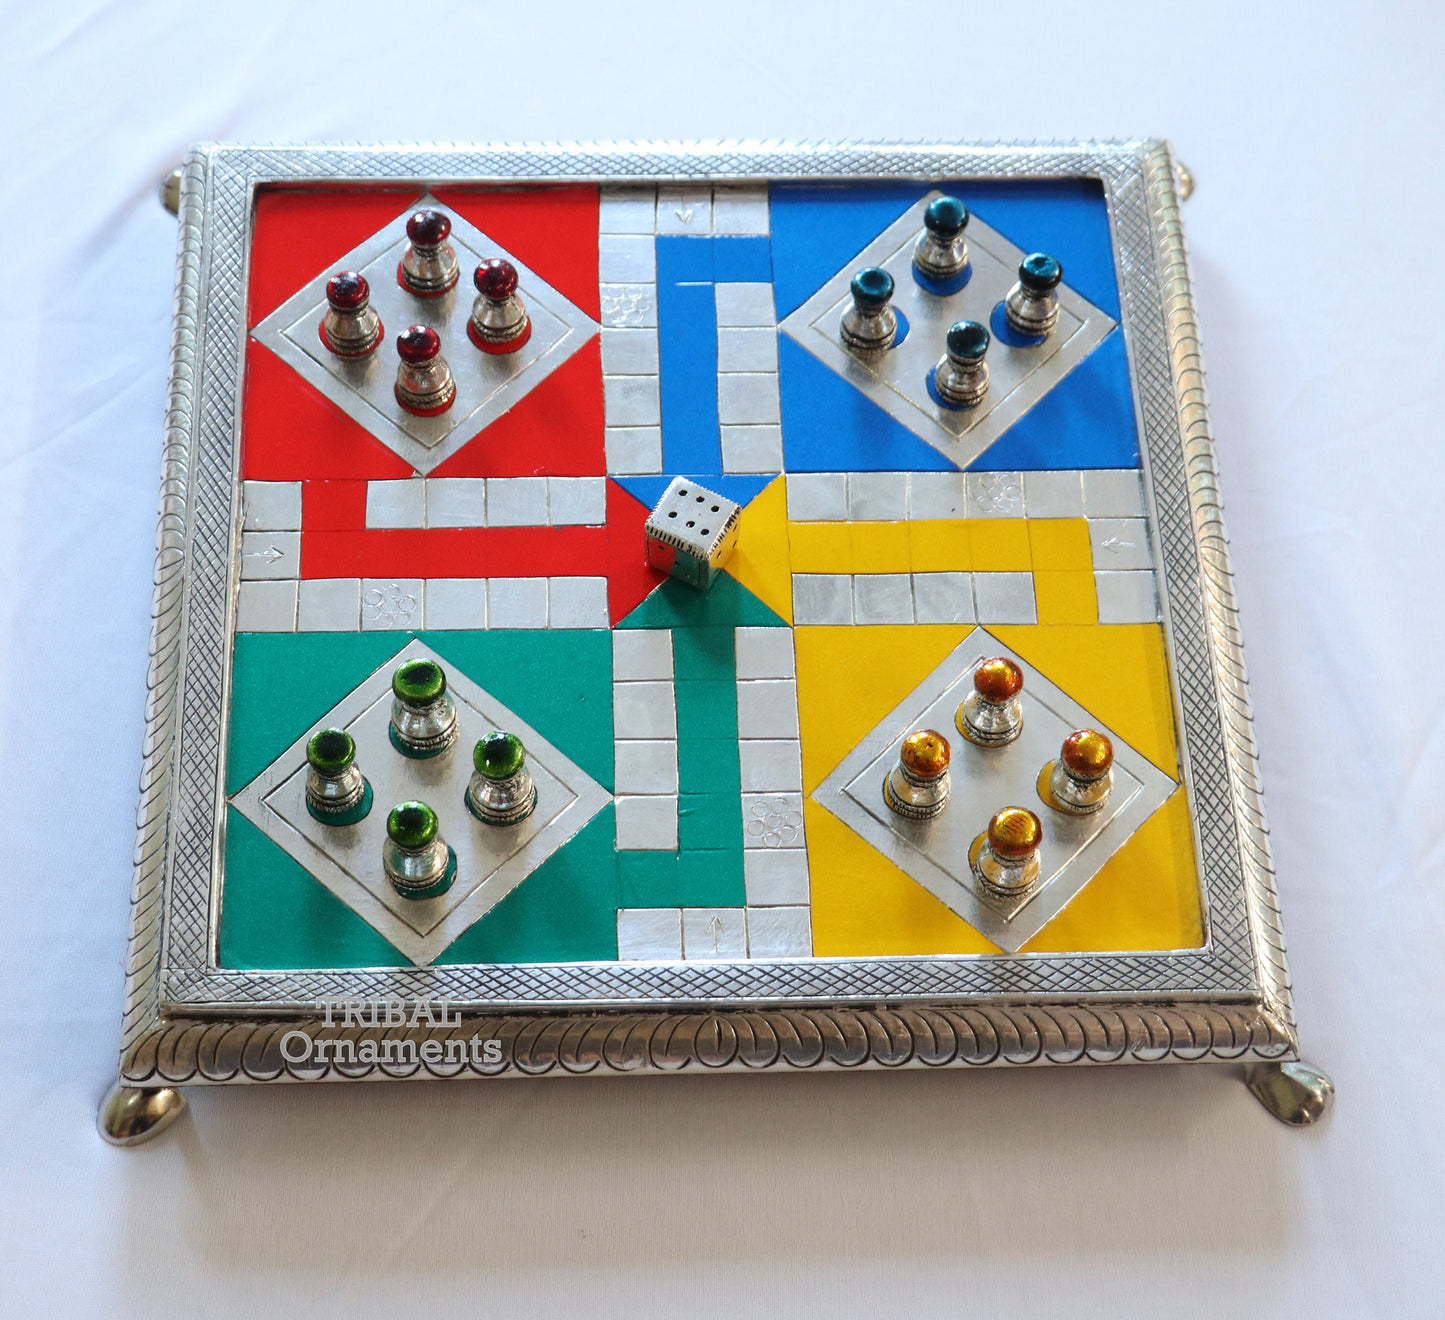 Pure 925 sterling silver handcrafted work LUDO Game board, Amazing handcrafted design on wooden base fabulous Royal silver article gift fr15 - TRIBAL ORNAMENTS